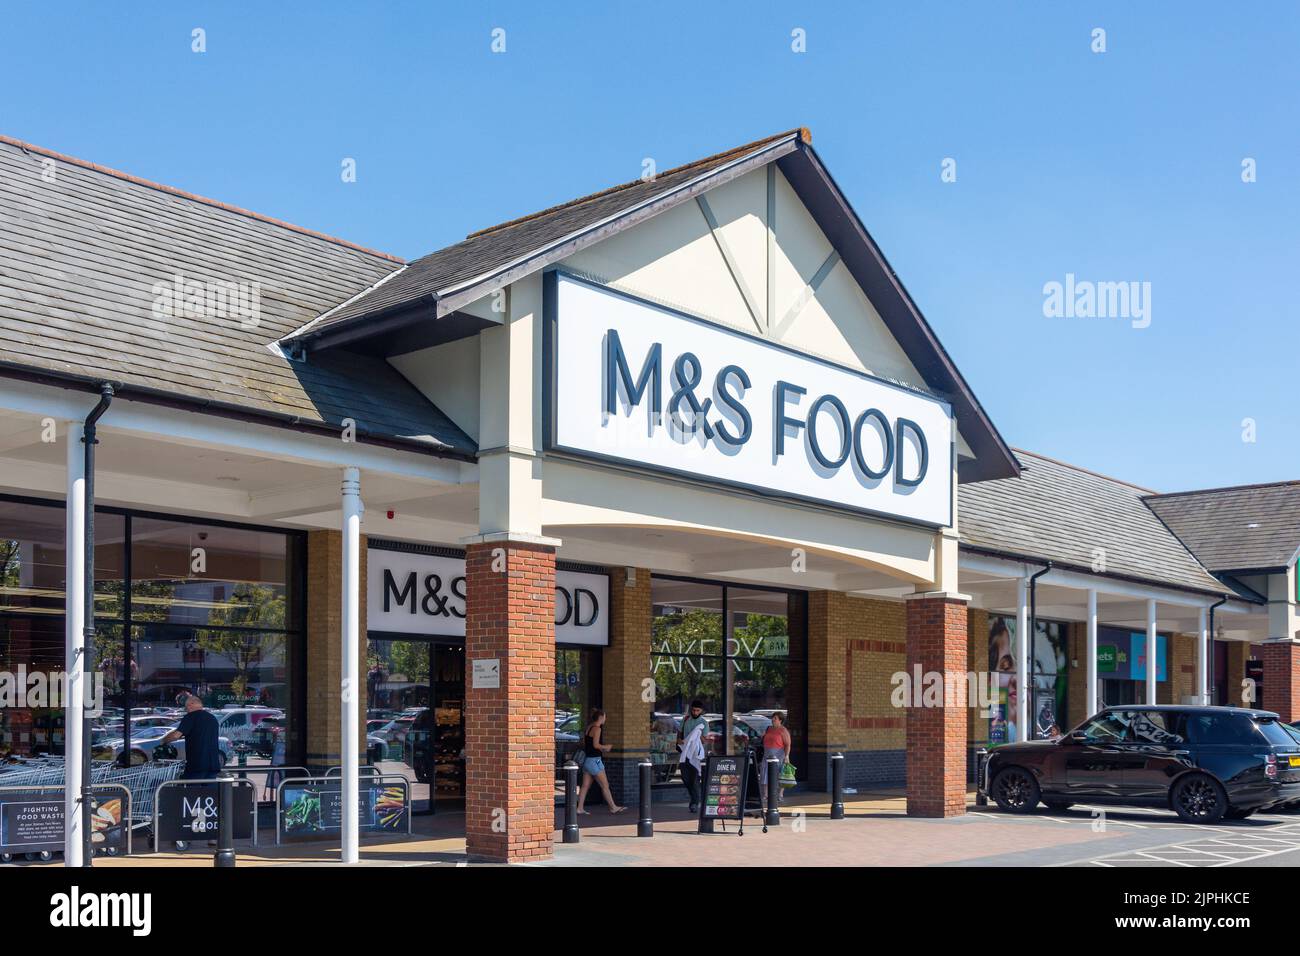 Entrance to M&S Food Hall, Two Rivers Shopping Centre, Staines-upon-Thames, Surrey, England, United Kingdom Stock Photo